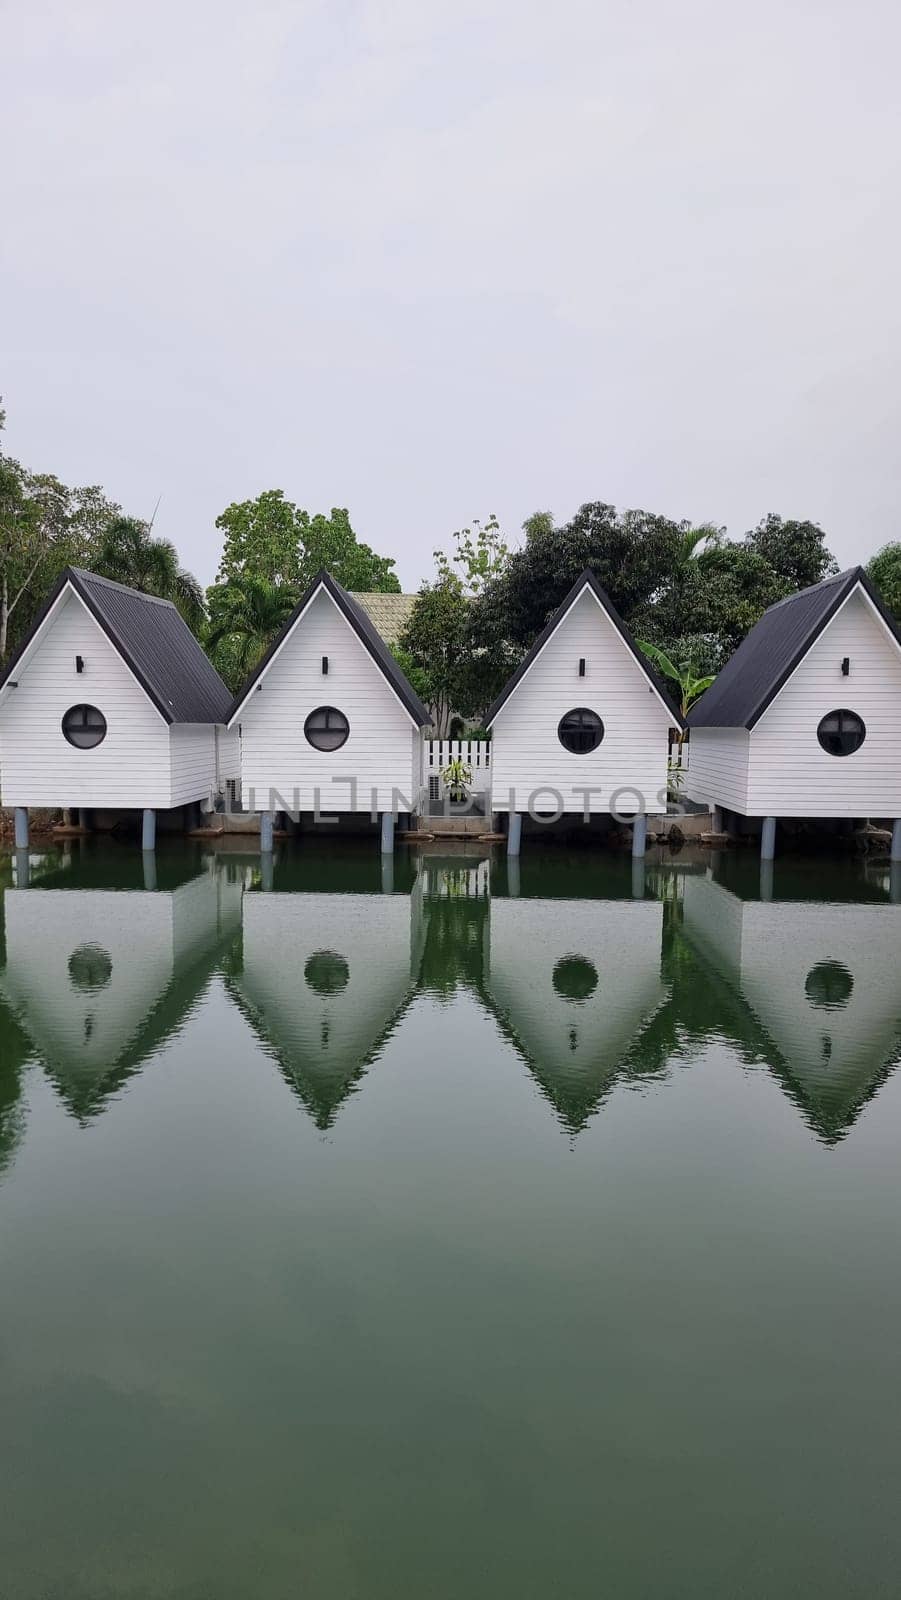 A serene lake reflects a row of charming white houses, creating a picturesque scene of tranquility and beauty.